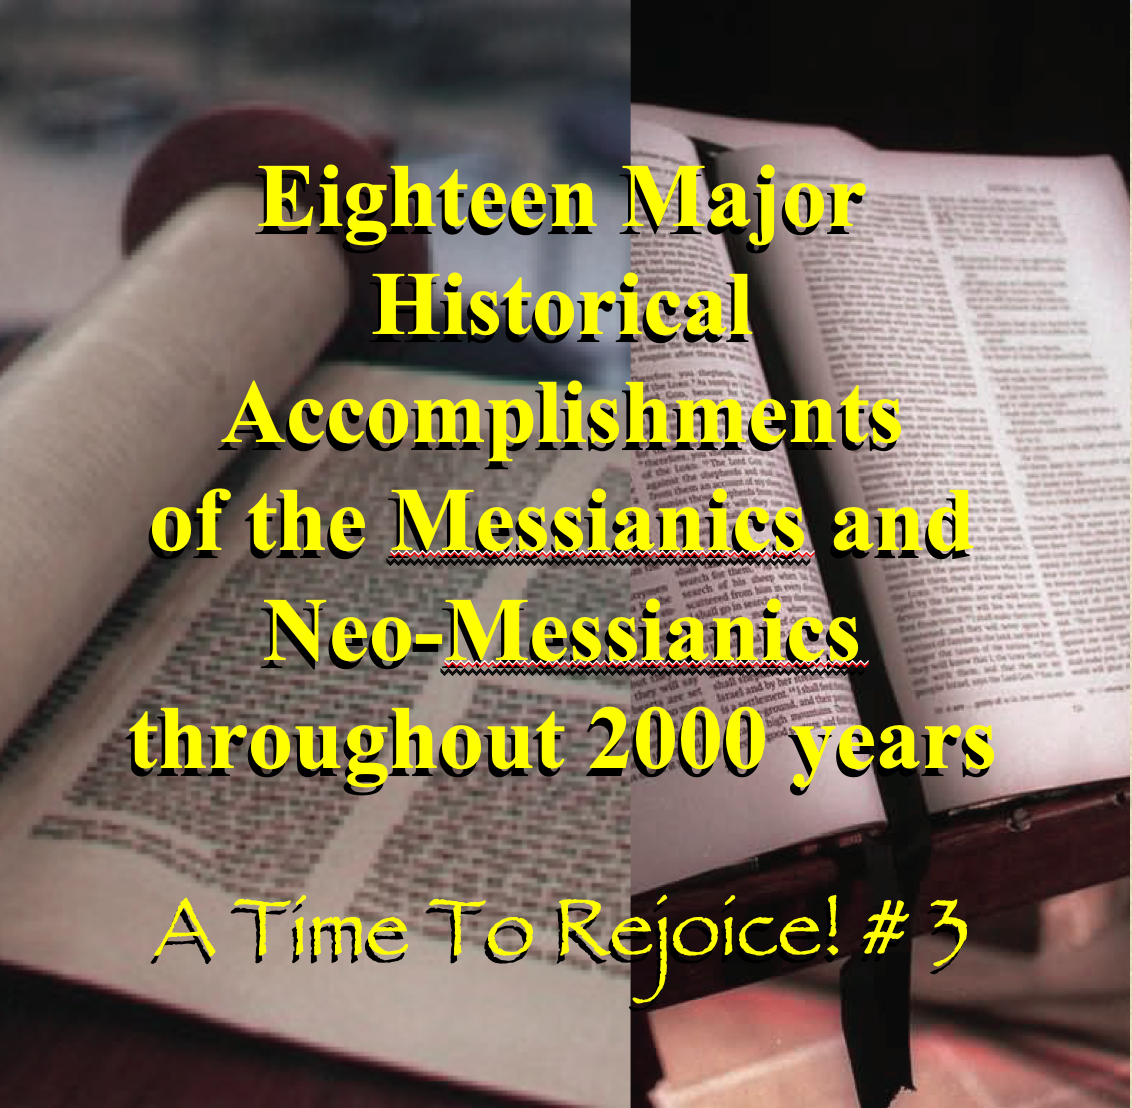 # 3. ‘18 Major Accomplishments of the Messianic Church’ by Dr Miles R. Jones - MP4 Video on USB Drive